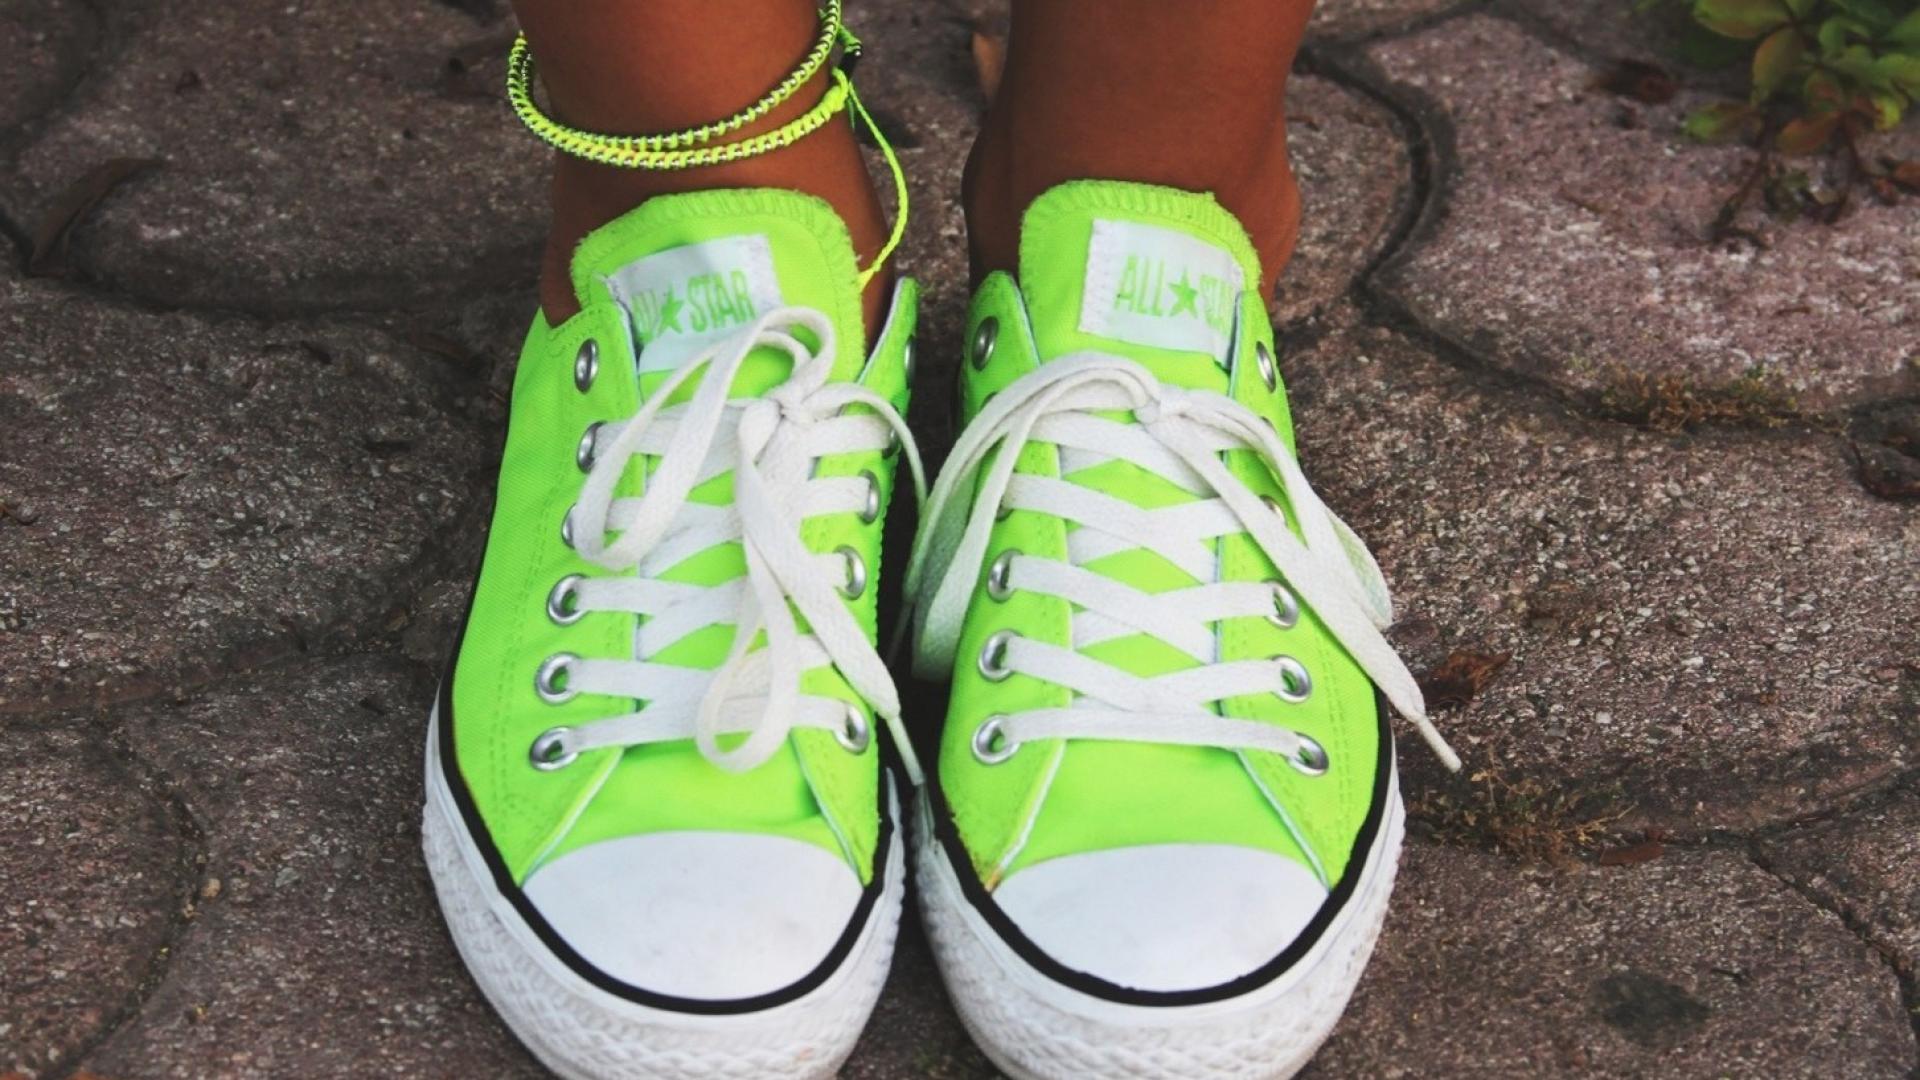 🥇 Green feet shoes converse all star body parts wallpaper | (182196)